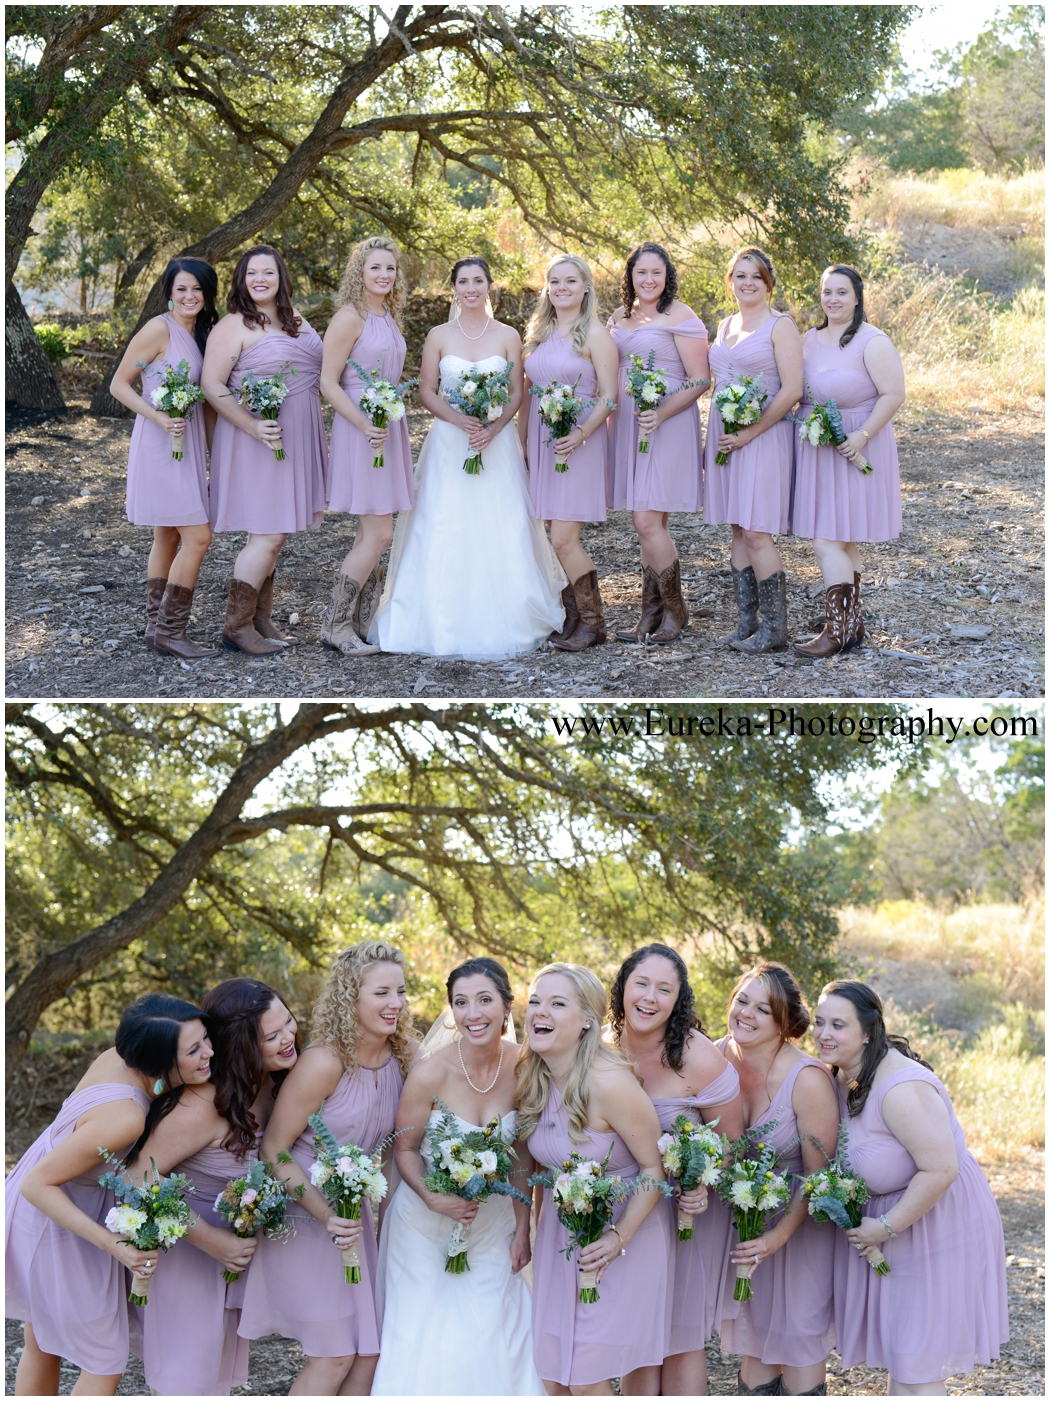 Texas Wedding: Bridesmaids dresses paired with cowboy boots